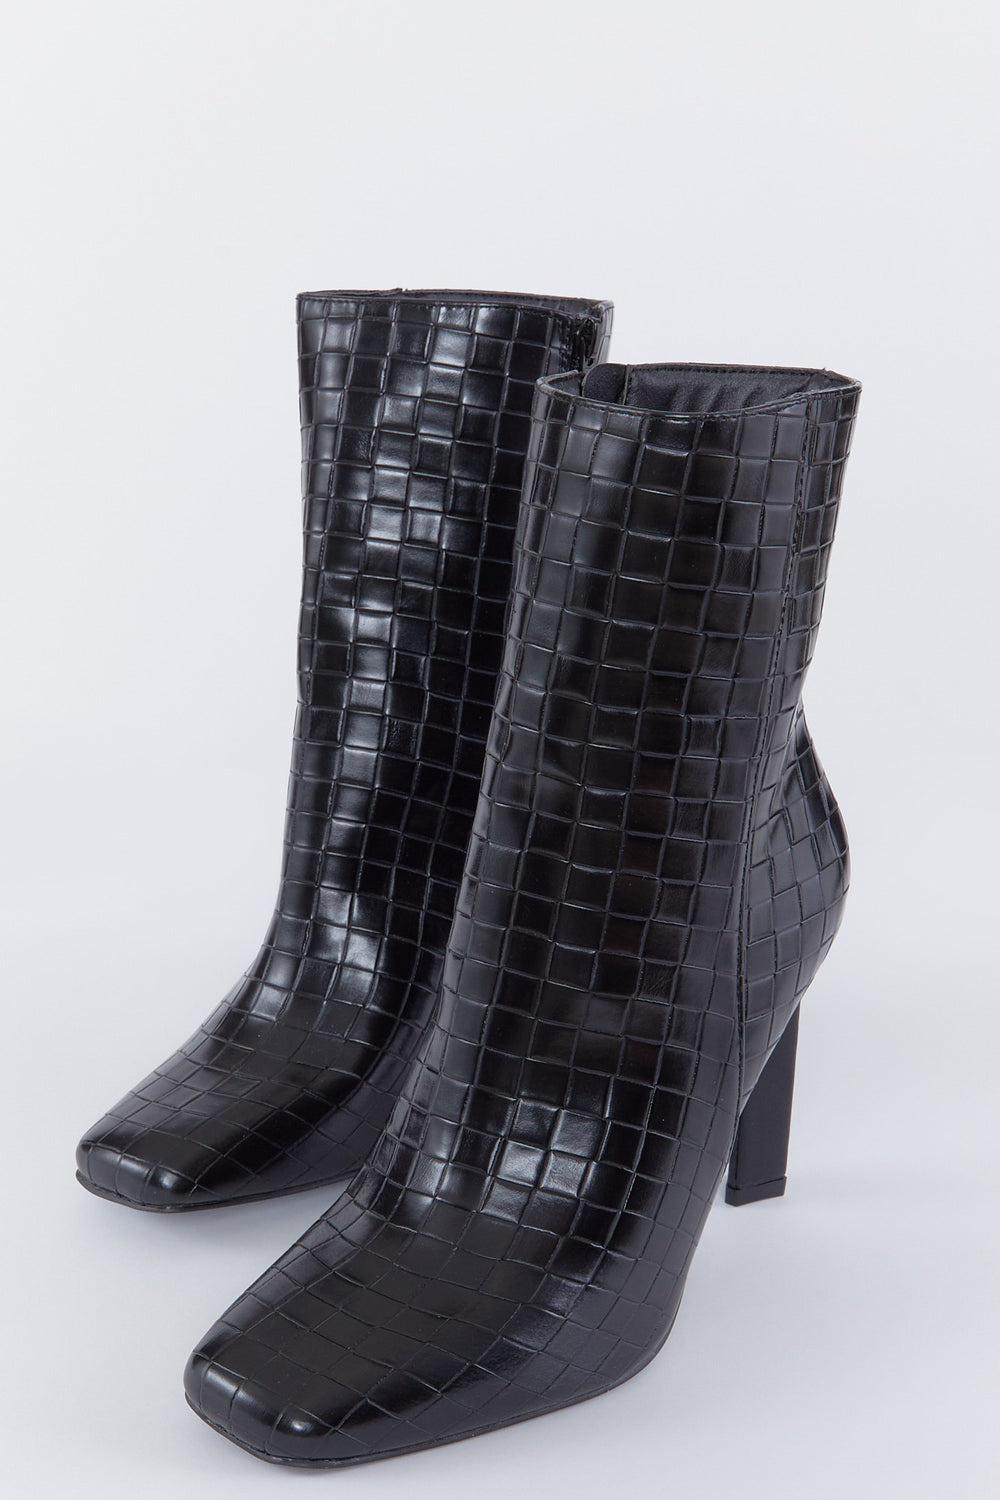 Faux-Leather Square Toe High Heel Boot Black